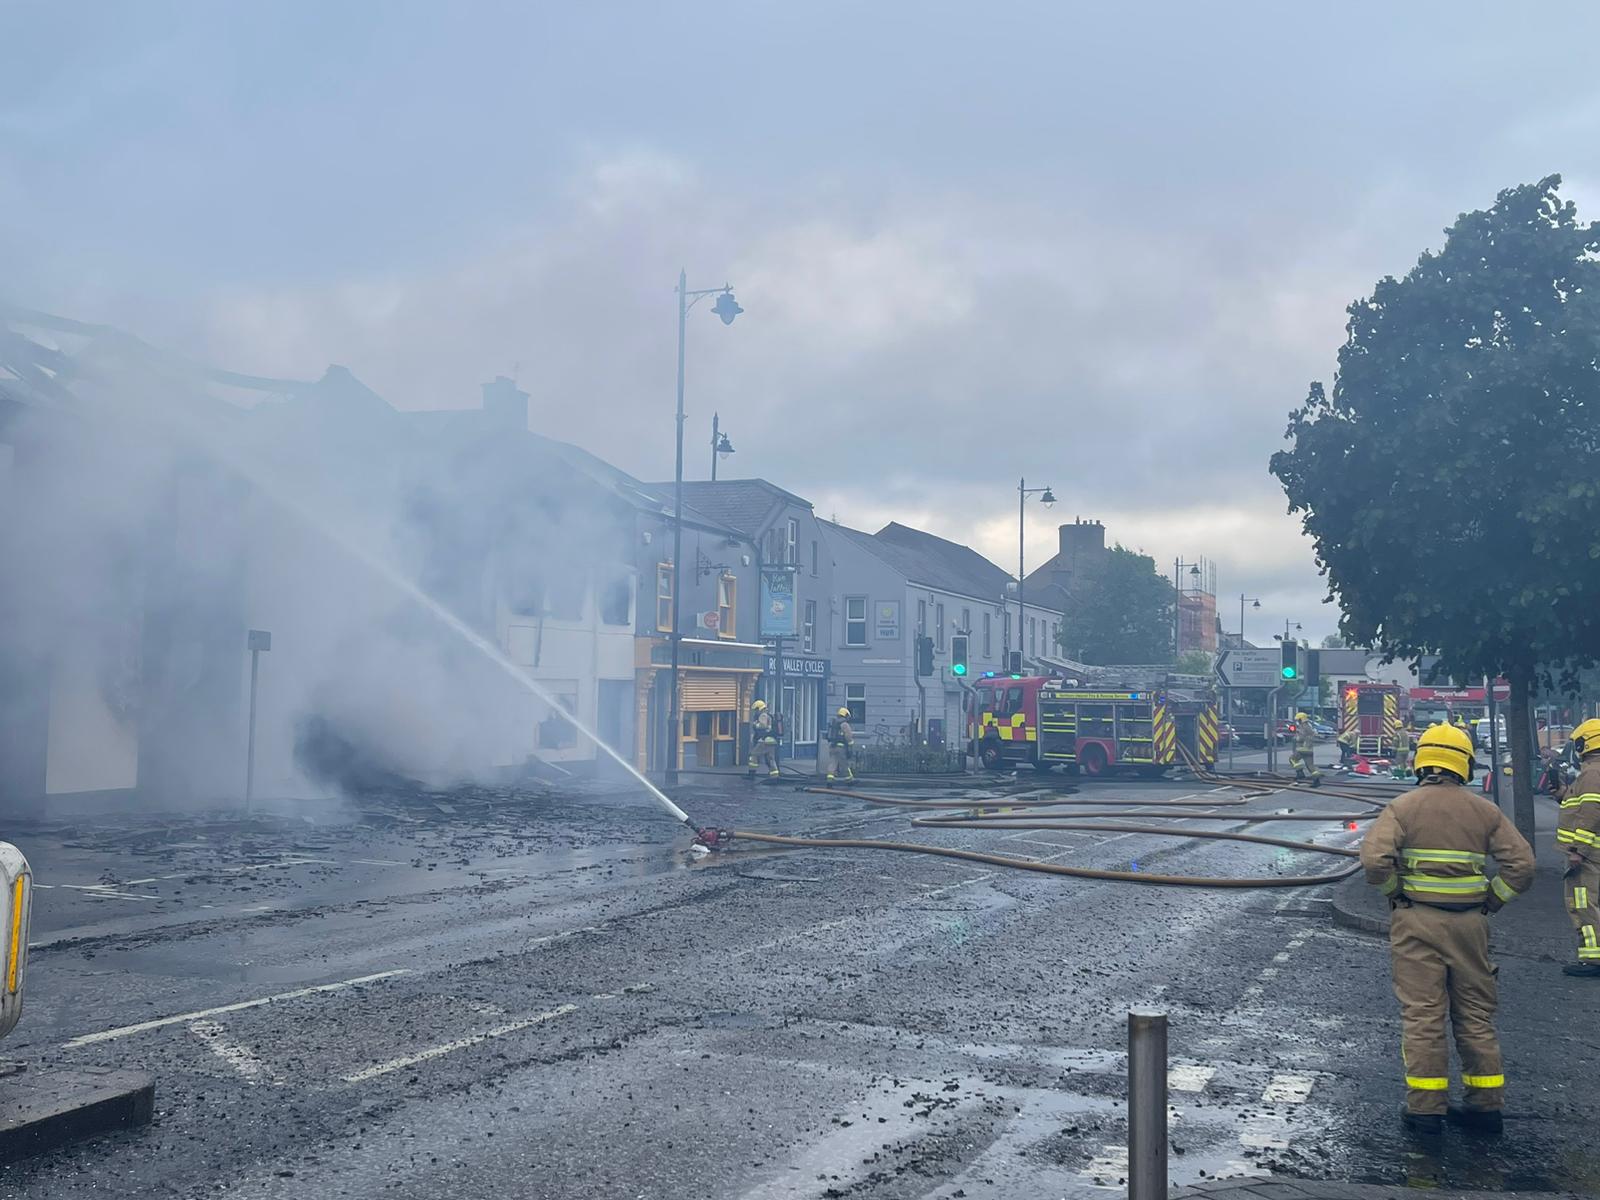 Firefighters survey a fire in a commercial premises in Limavady after extinguishing the blaze.